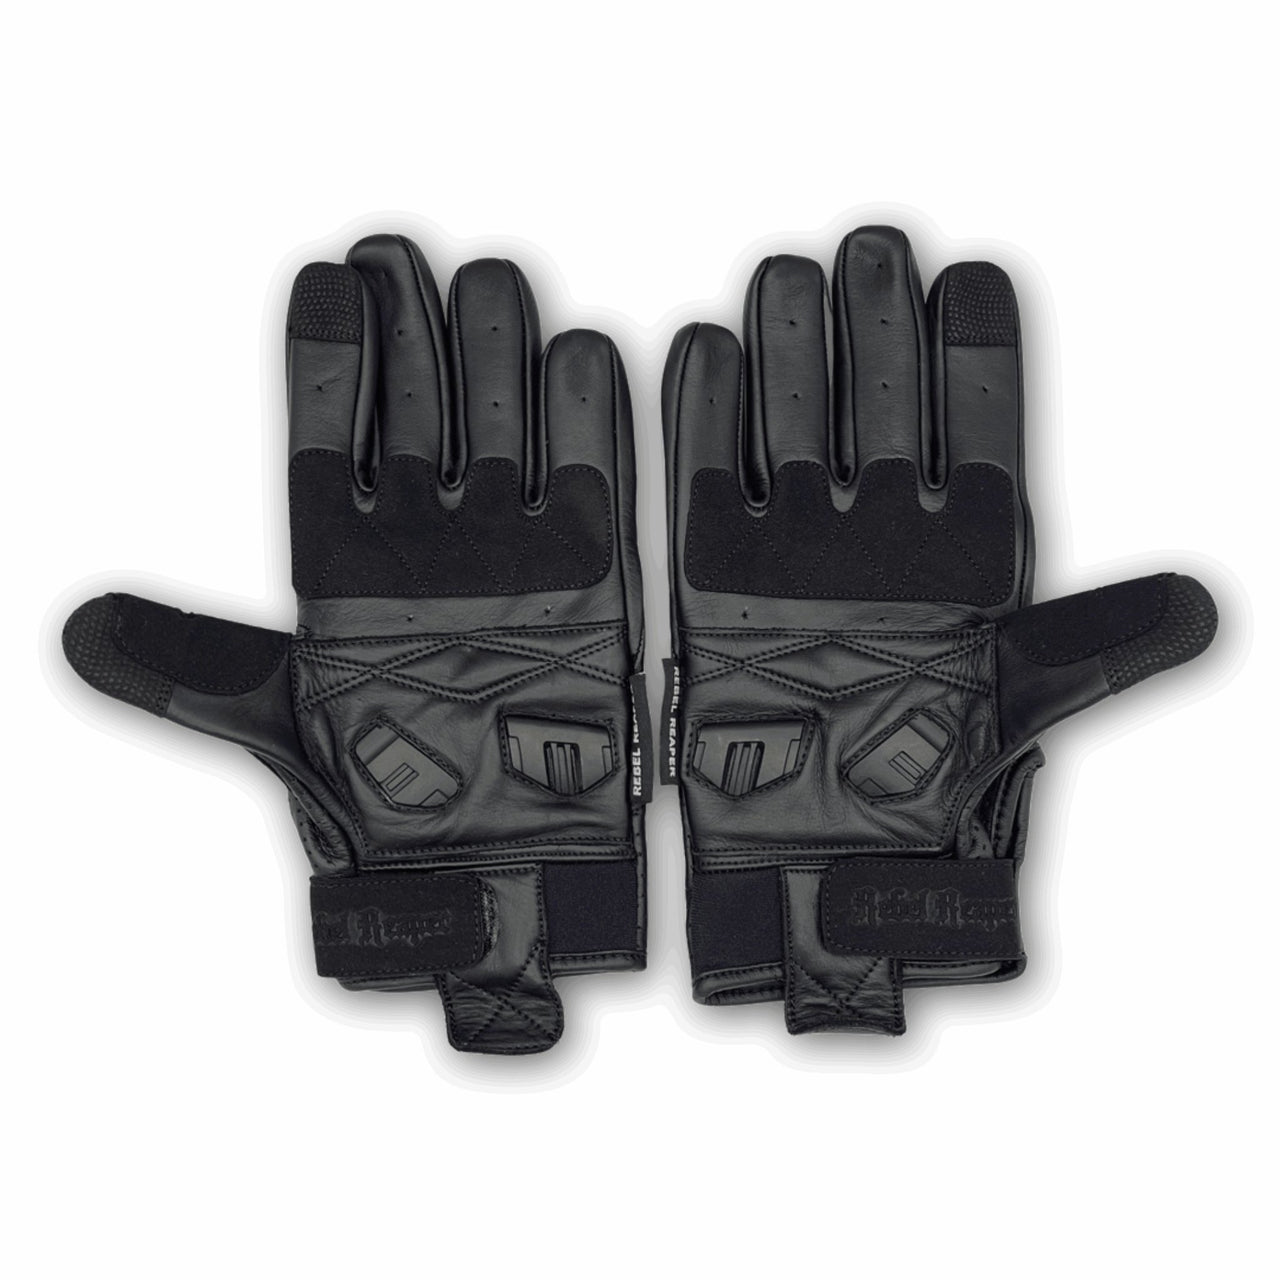 Leather Perforated Motorcycle Riding Gloves - Modern - Black